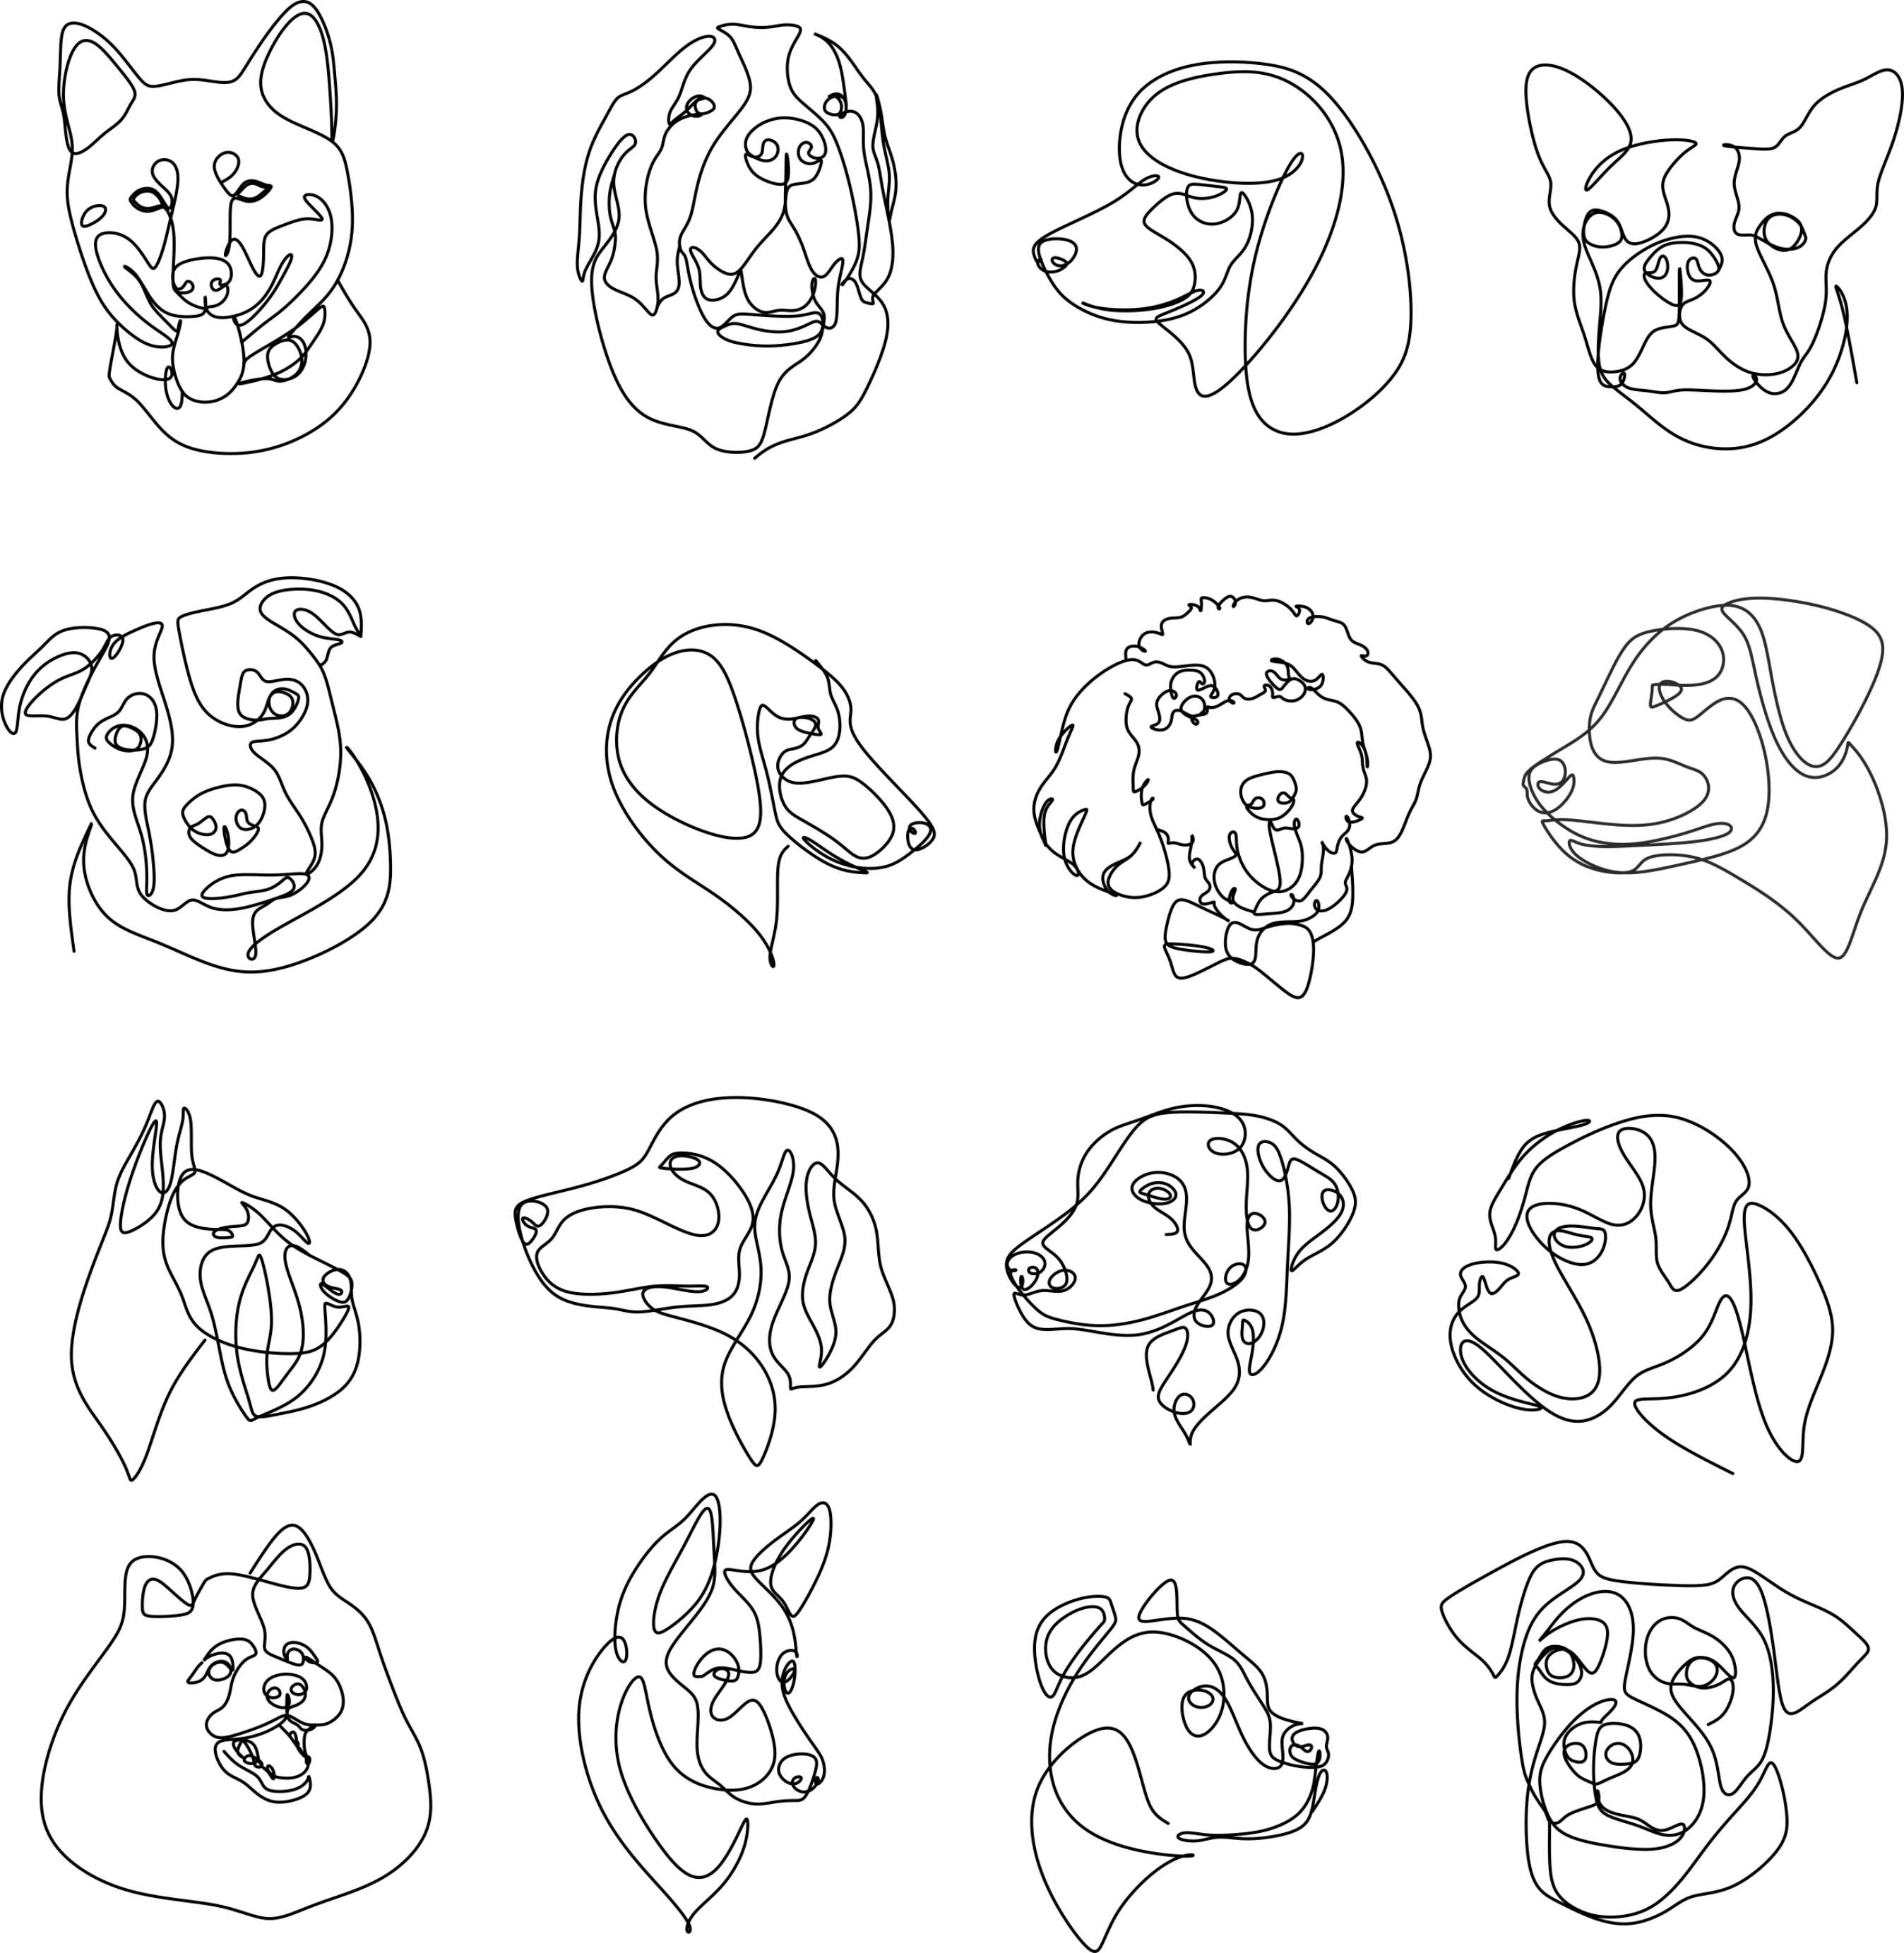 16 Dogs line drawings. Dog breeds